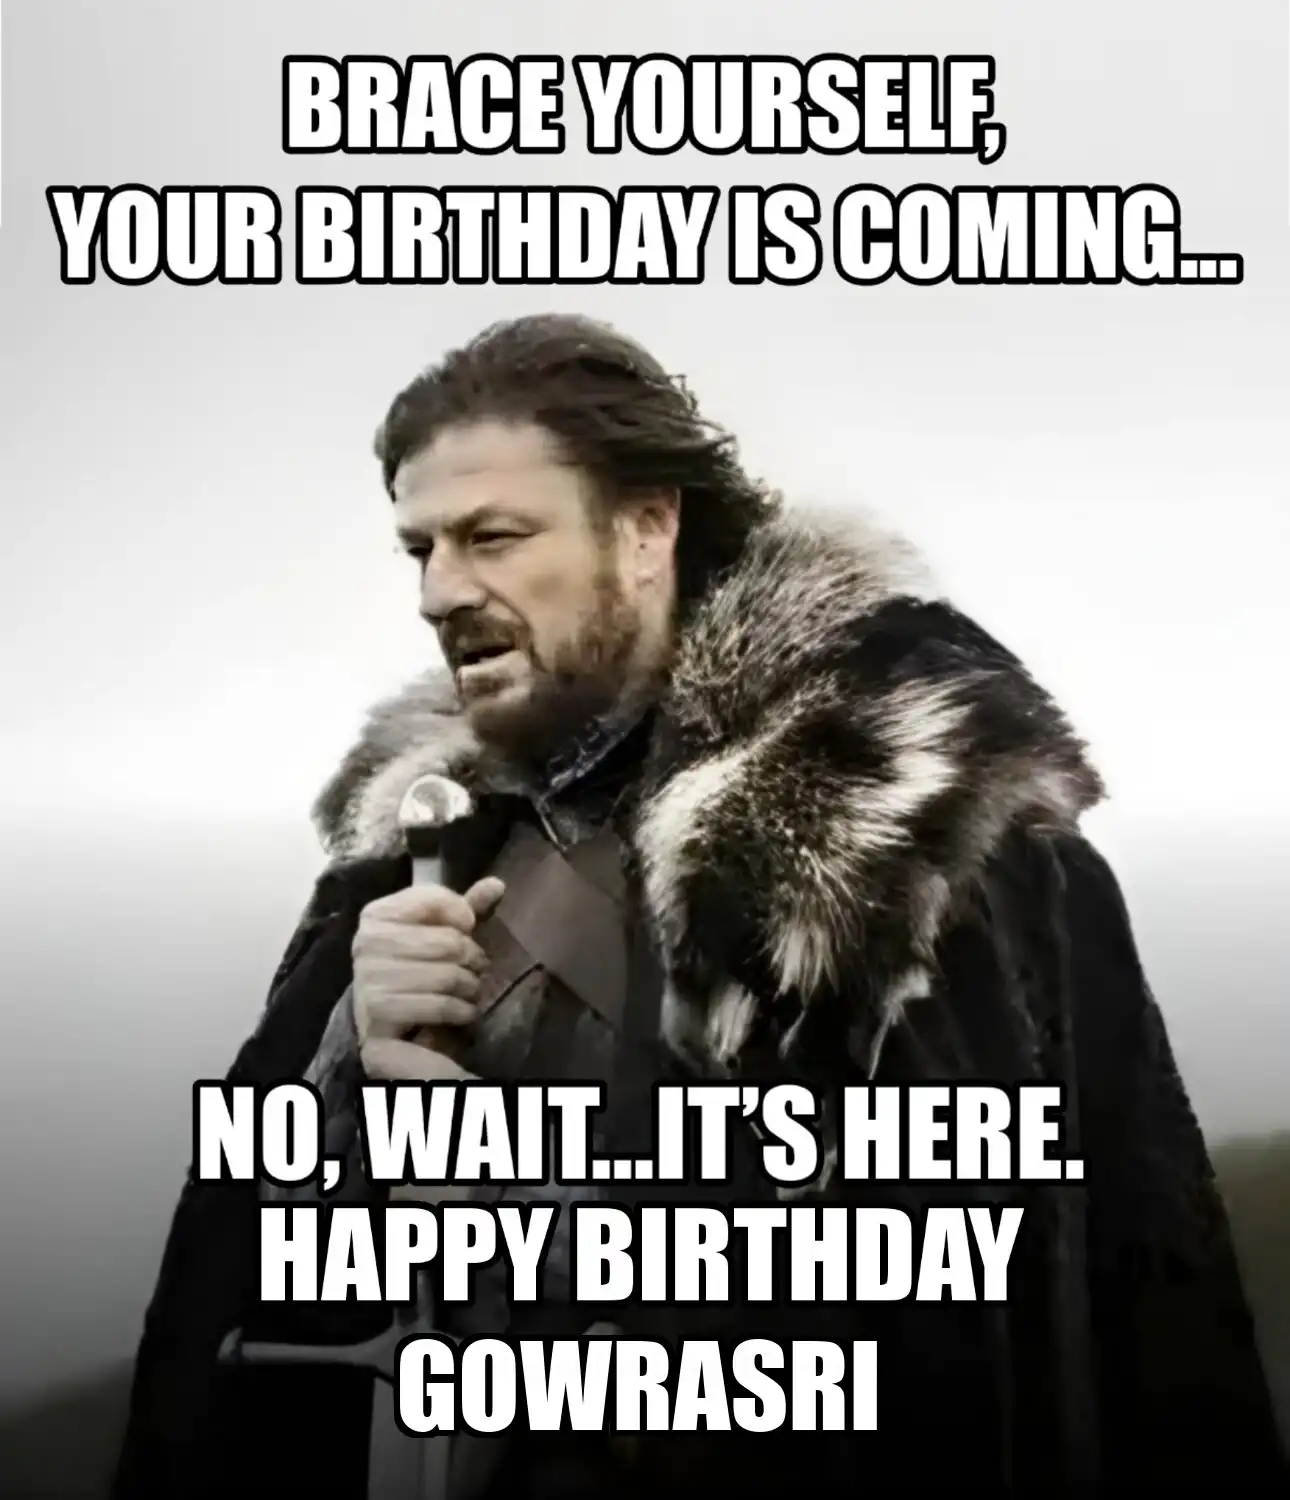 Happy Birthday Gowrasri Brace Yourself Your Birthday Is Coming Meme